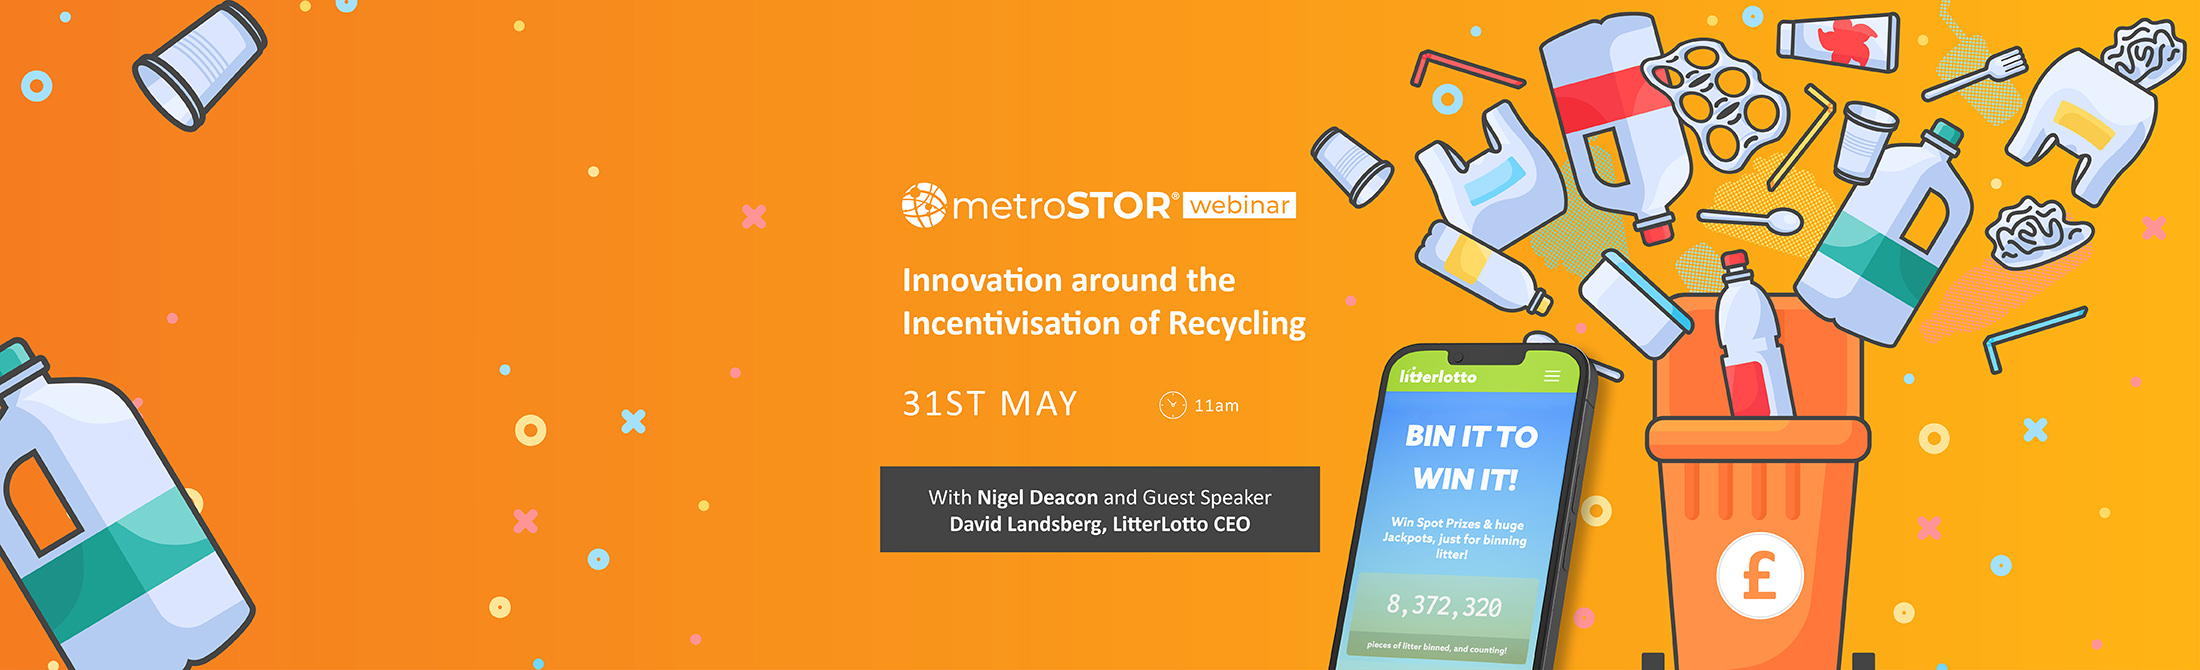 Webinar - Incentives for Communal Recycling